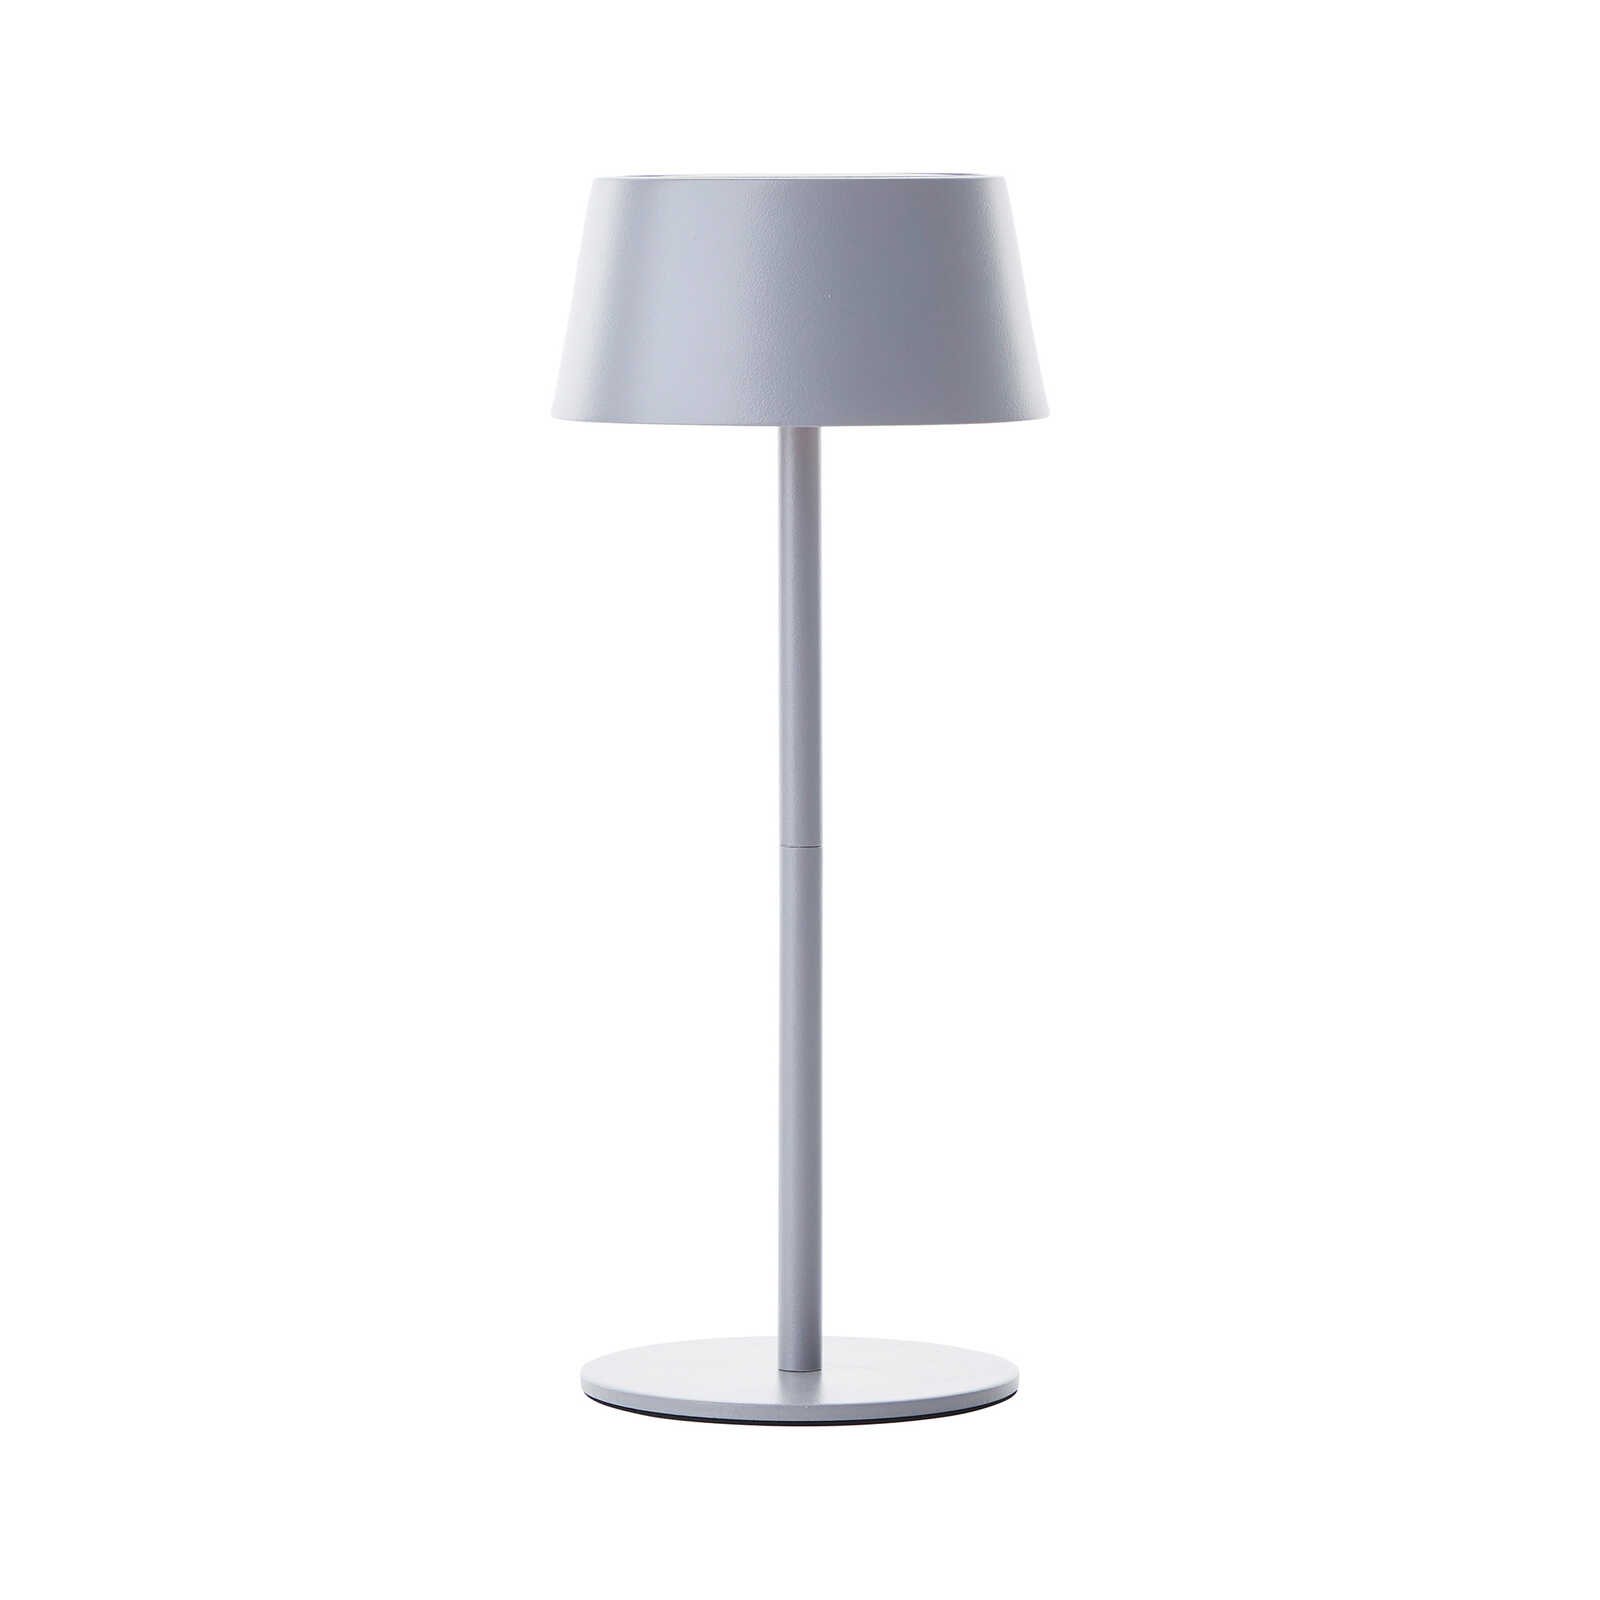 Metal table lamp - Outy 2 - Grey
